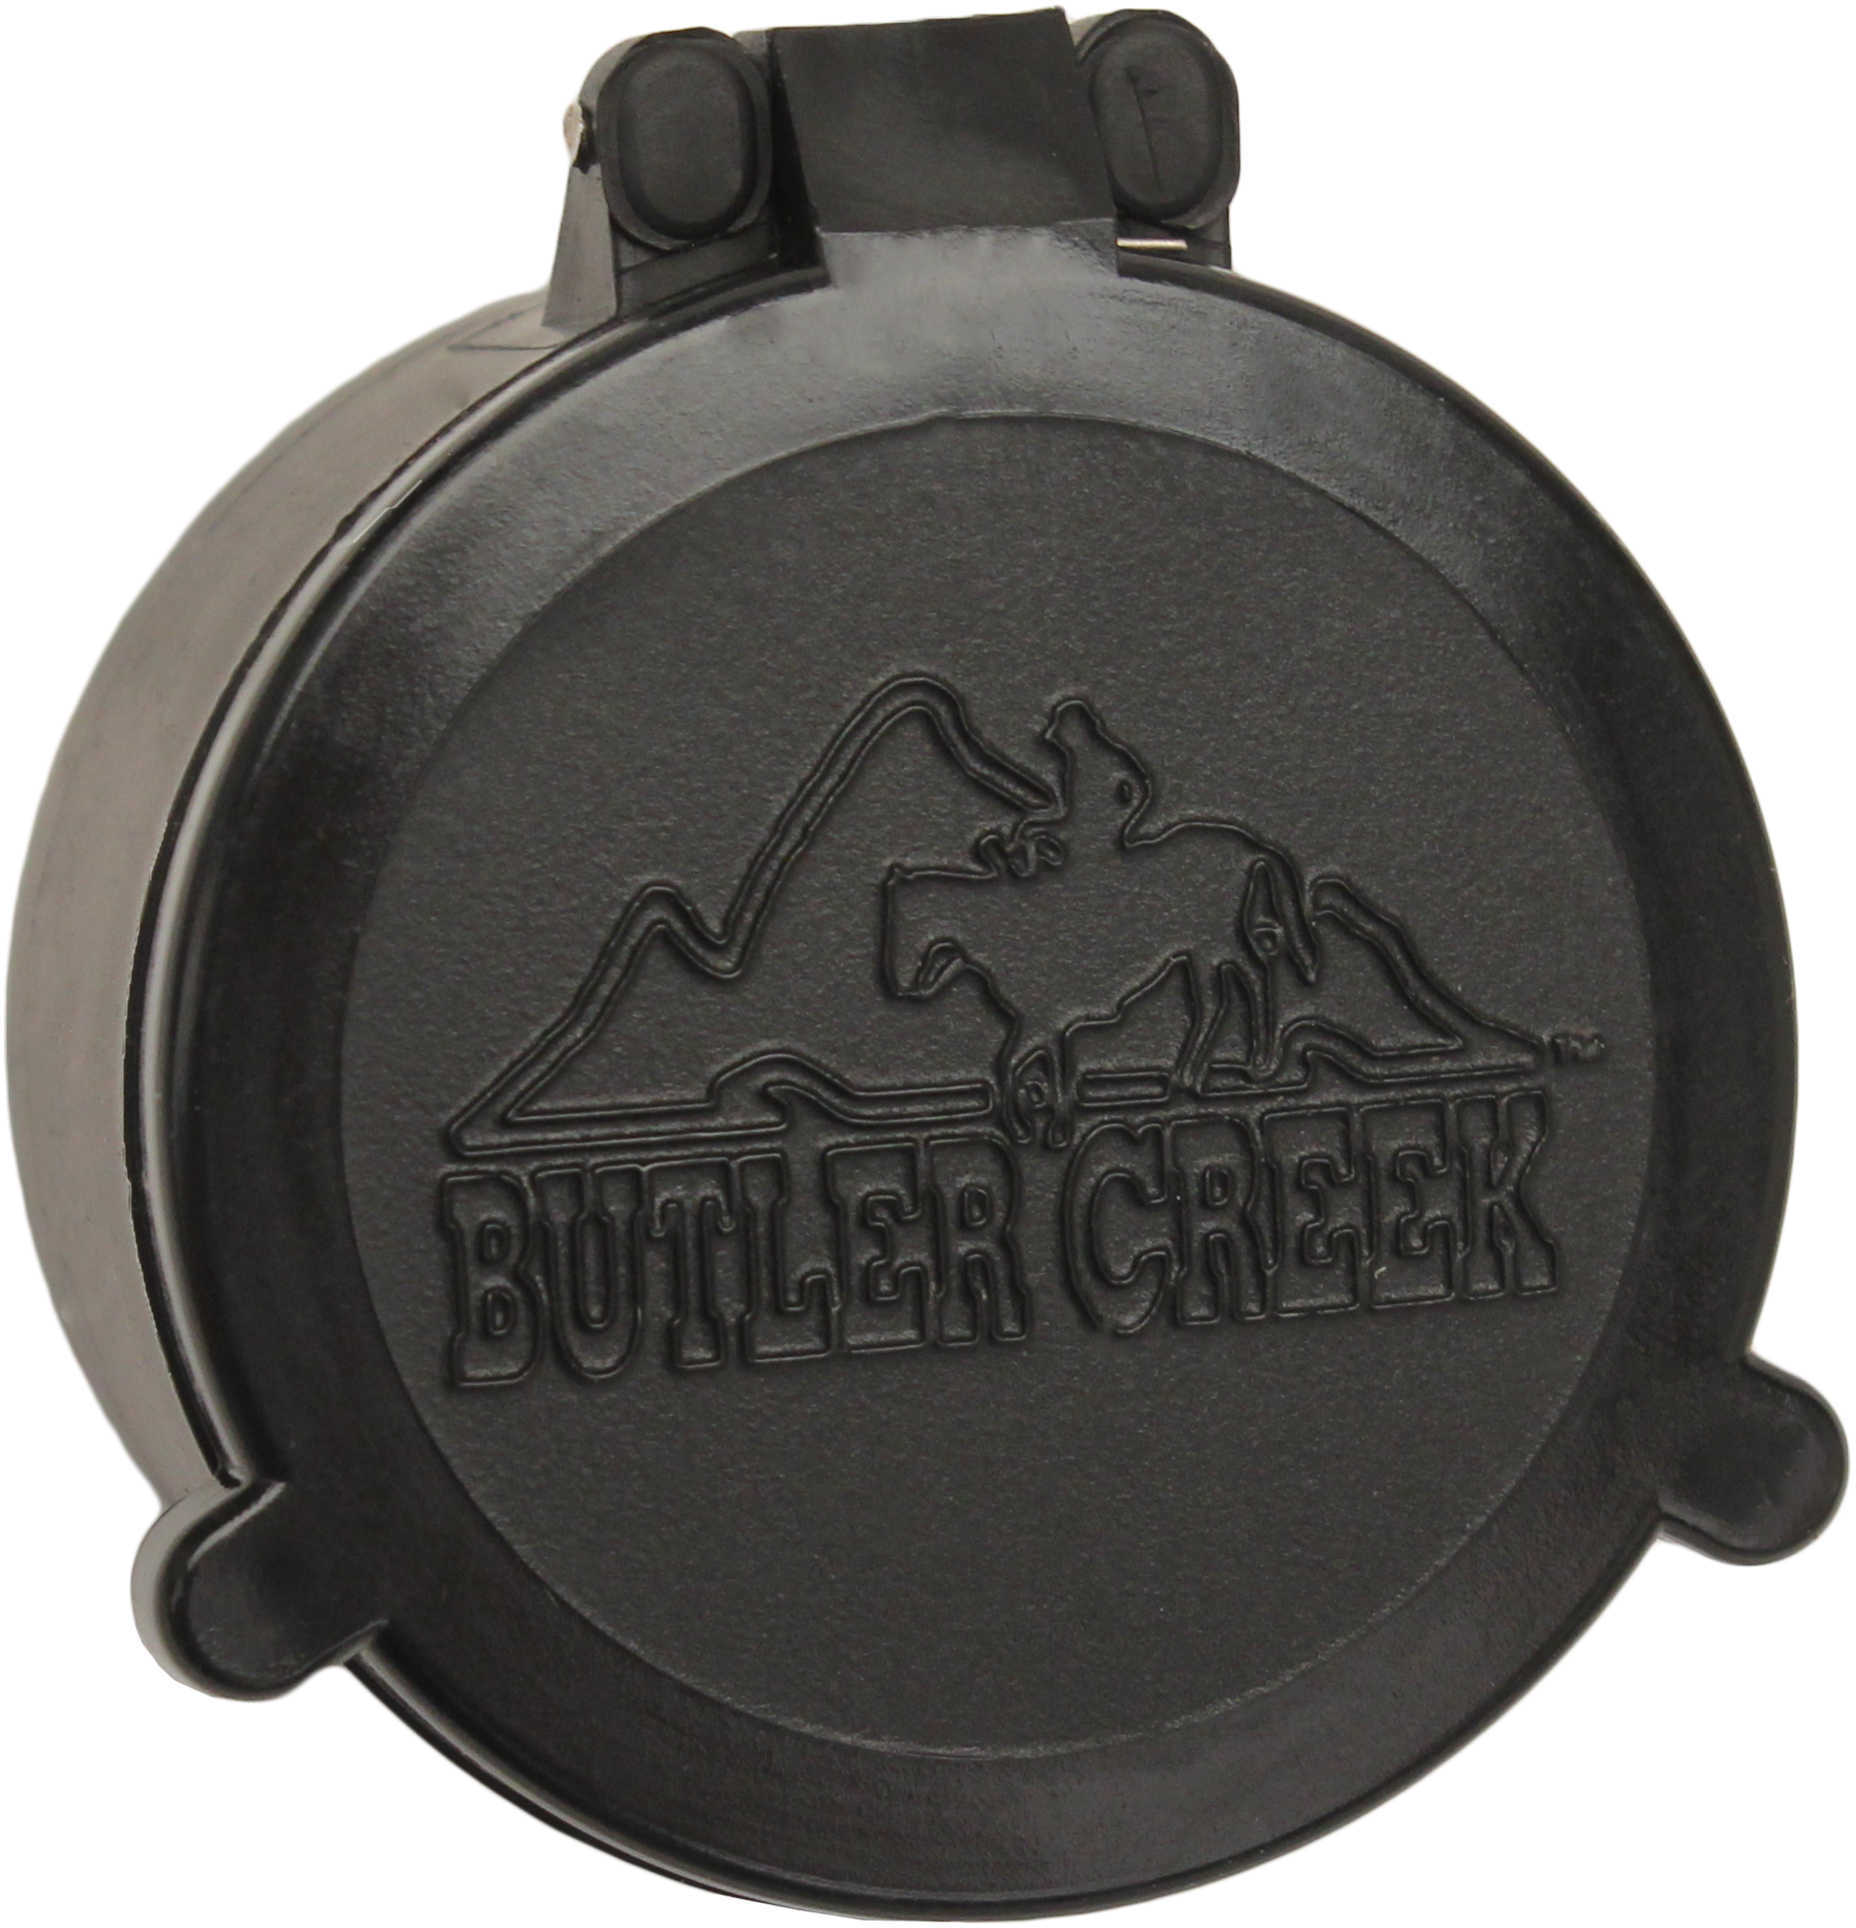 Butler Creek Flip-Open Scope Cover - 25 Objective 1.800" Diameter Quiet Opening lids at The Touch Of Your thum